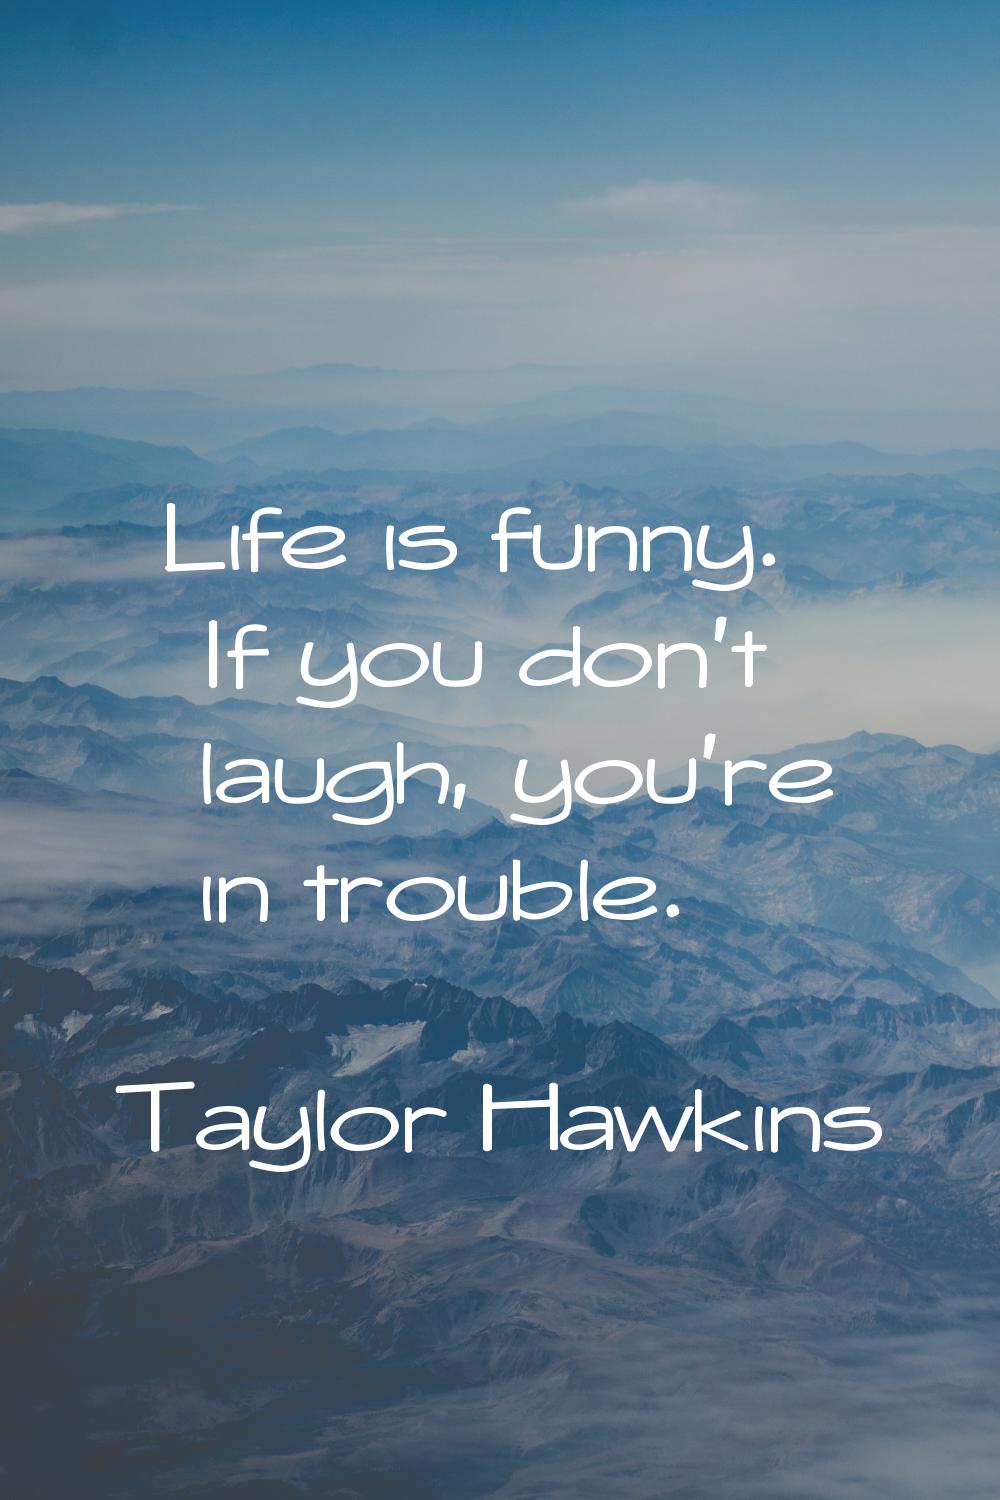 Life is funny. If you don't laugh, you're in trouble.